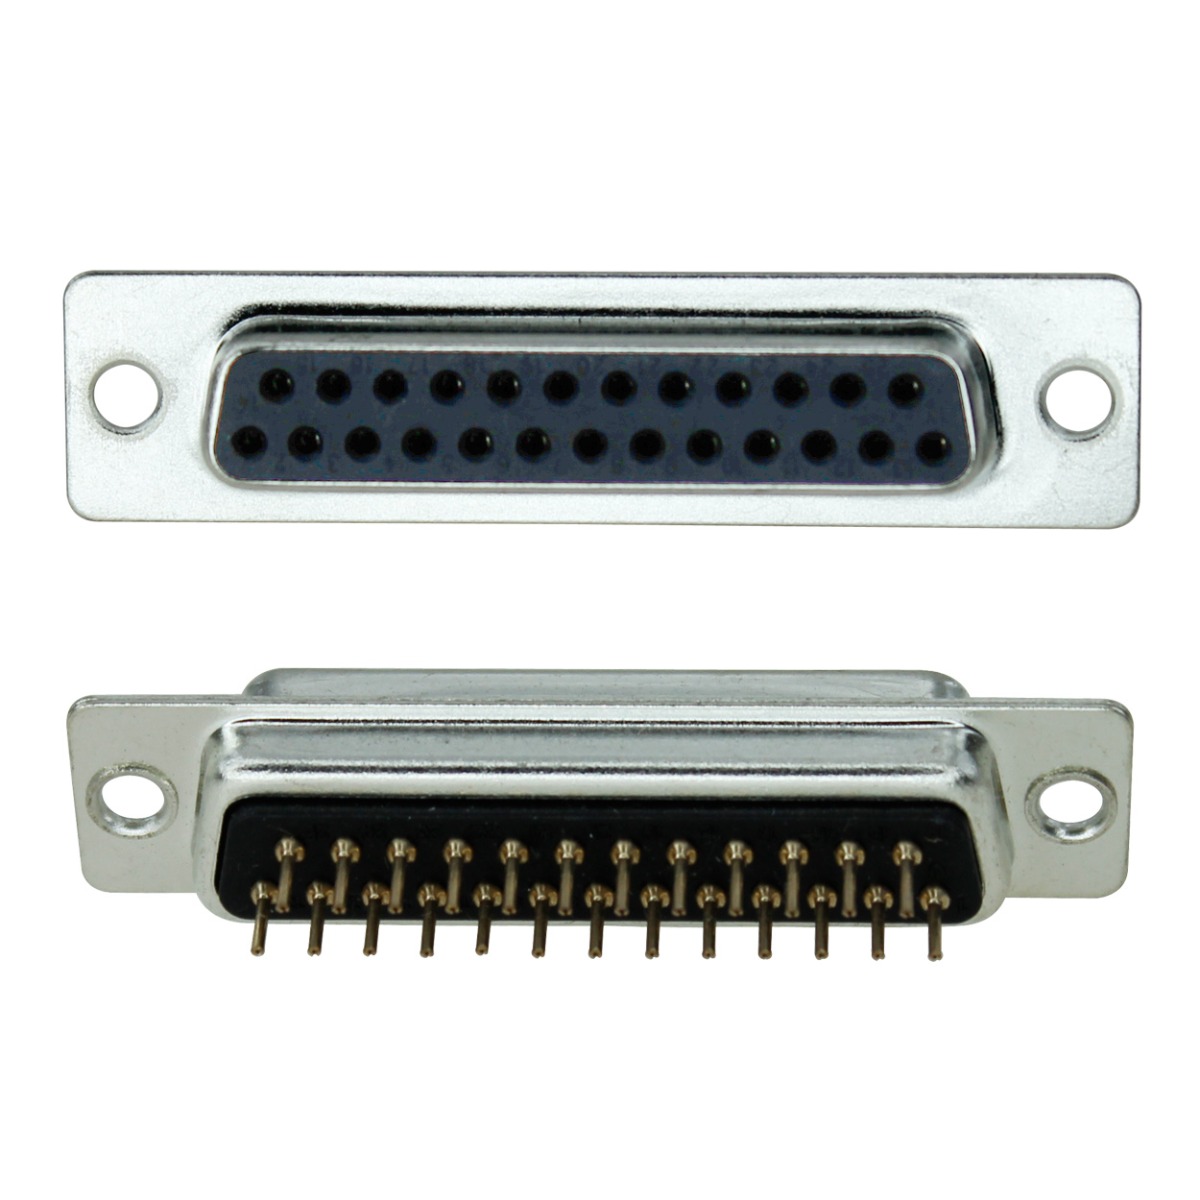 PCB mount connectors are soldered to a PCB, allowing for cable or wire attachment.